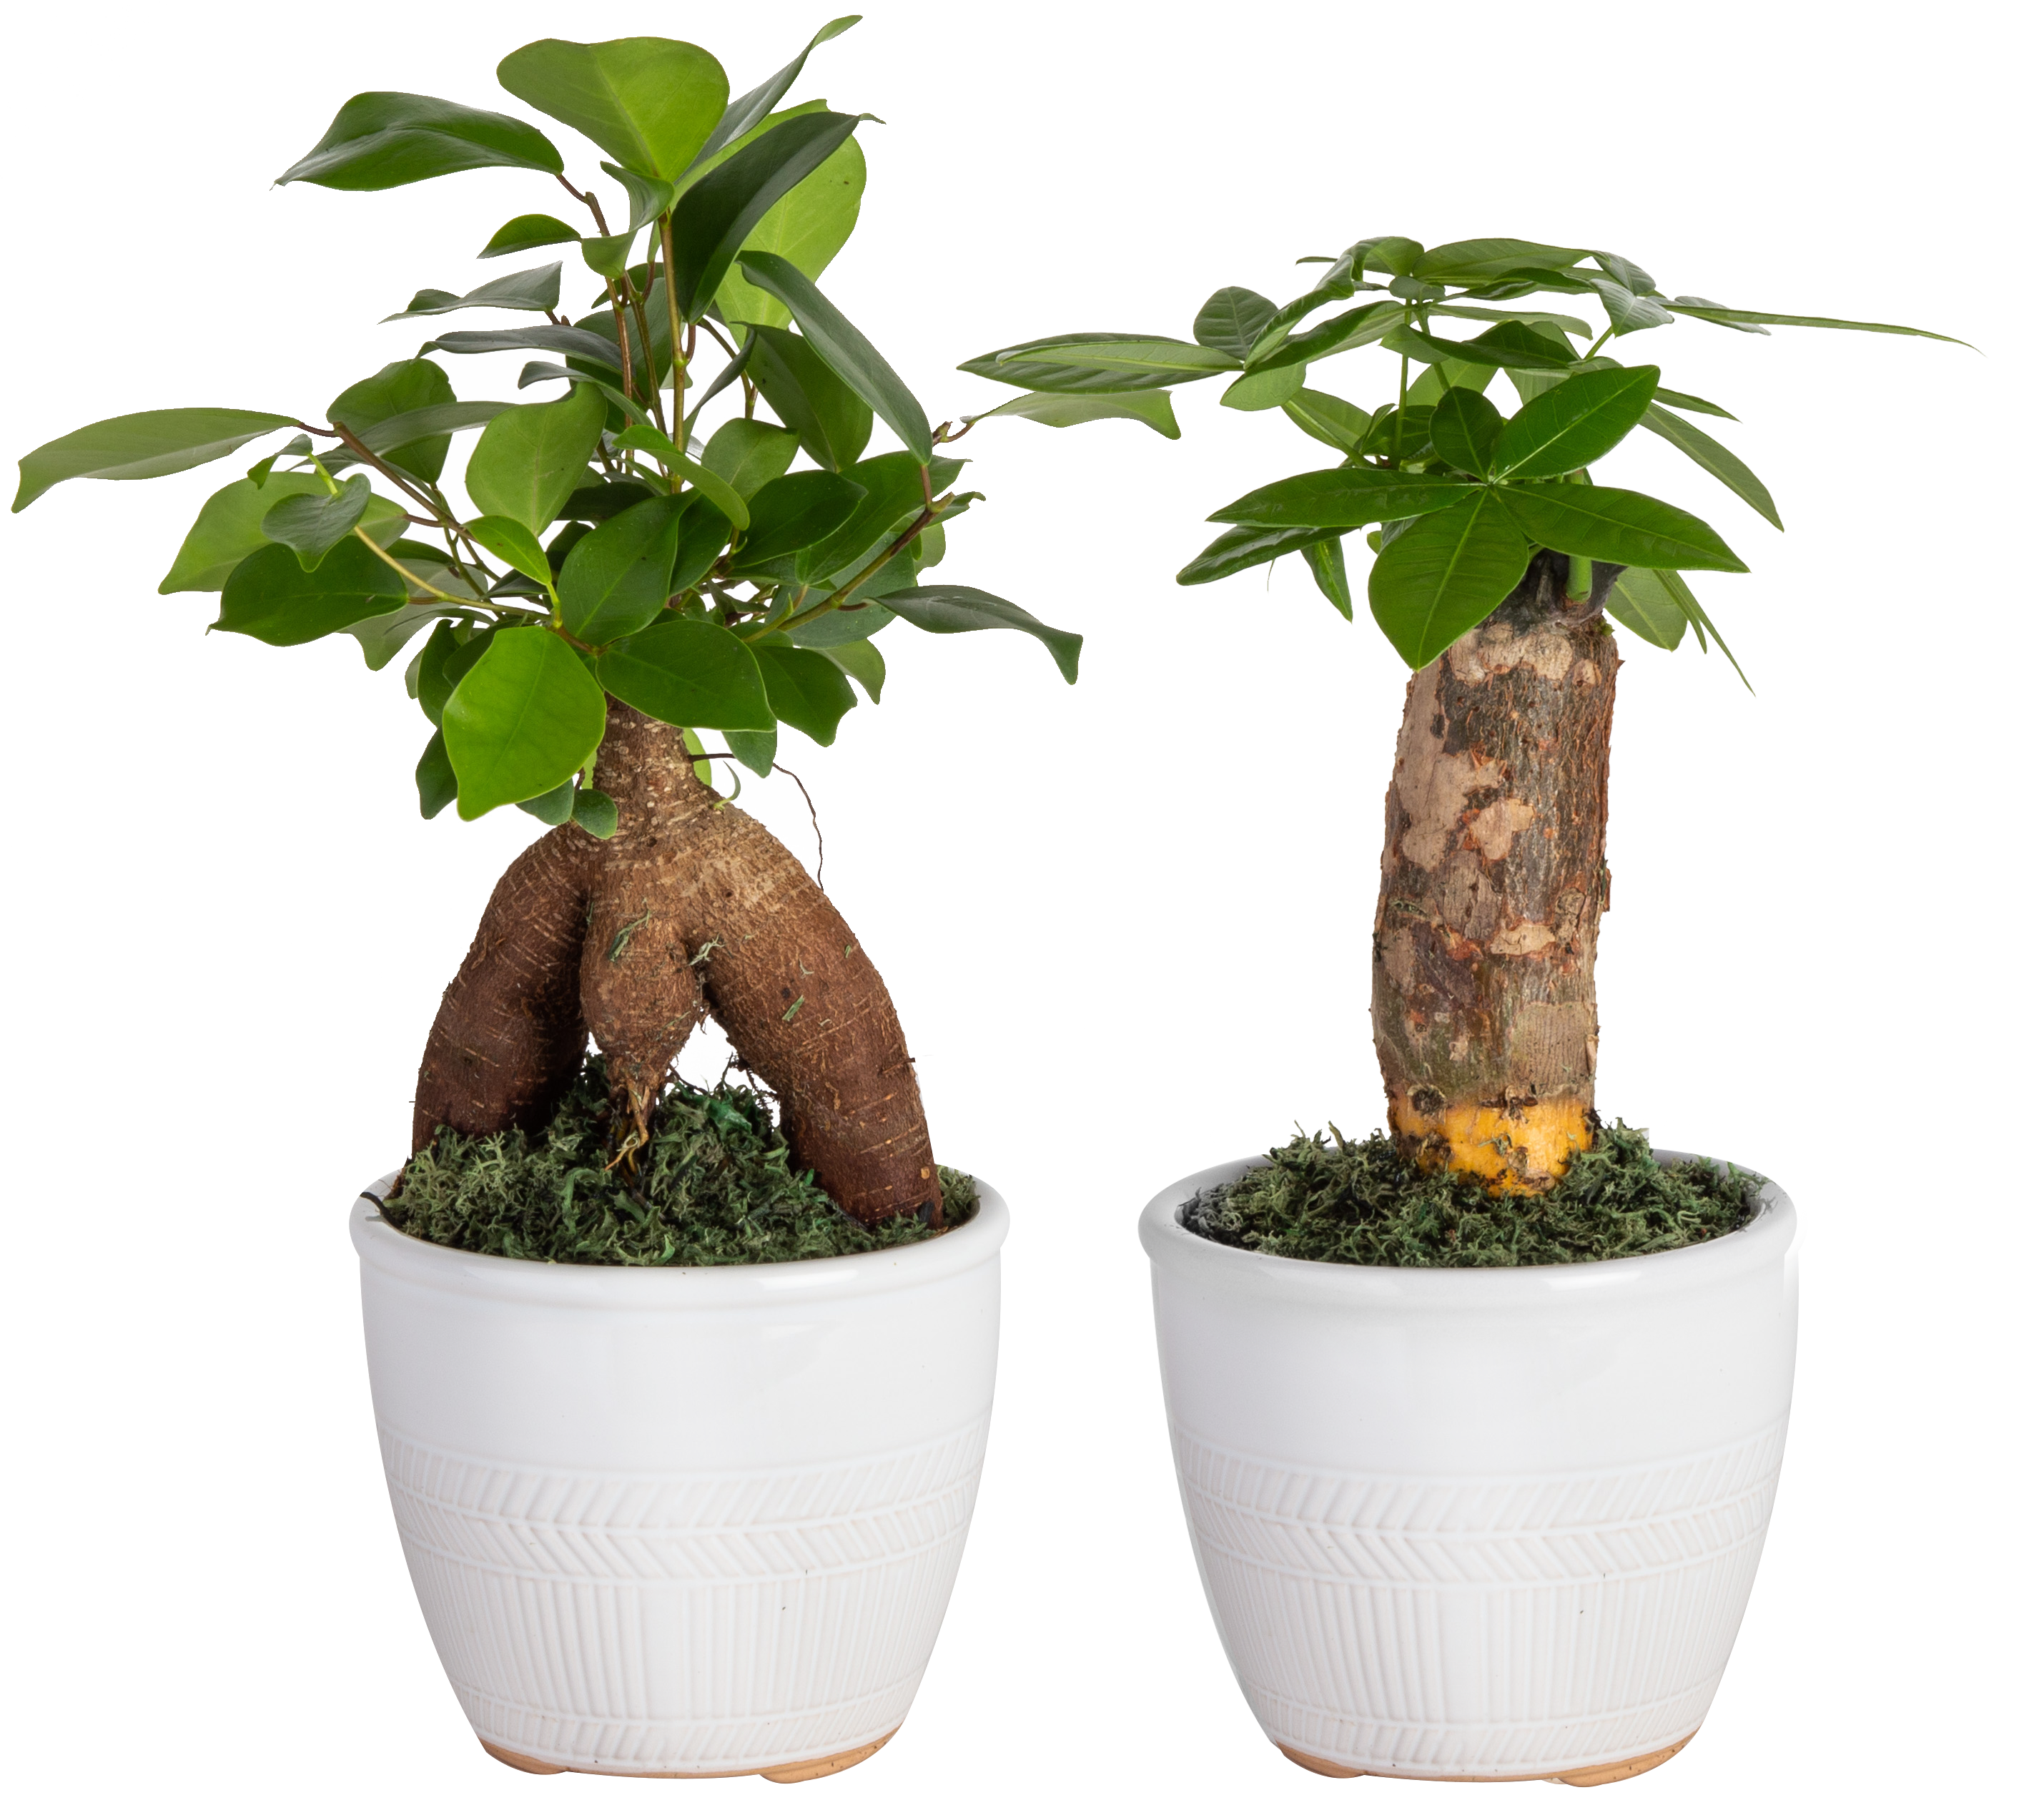 Ginseng 5-in Stump House Farms Plant Ficus Planter at in Costa Plants department 2-Pack House the and Bonsai Pachira in